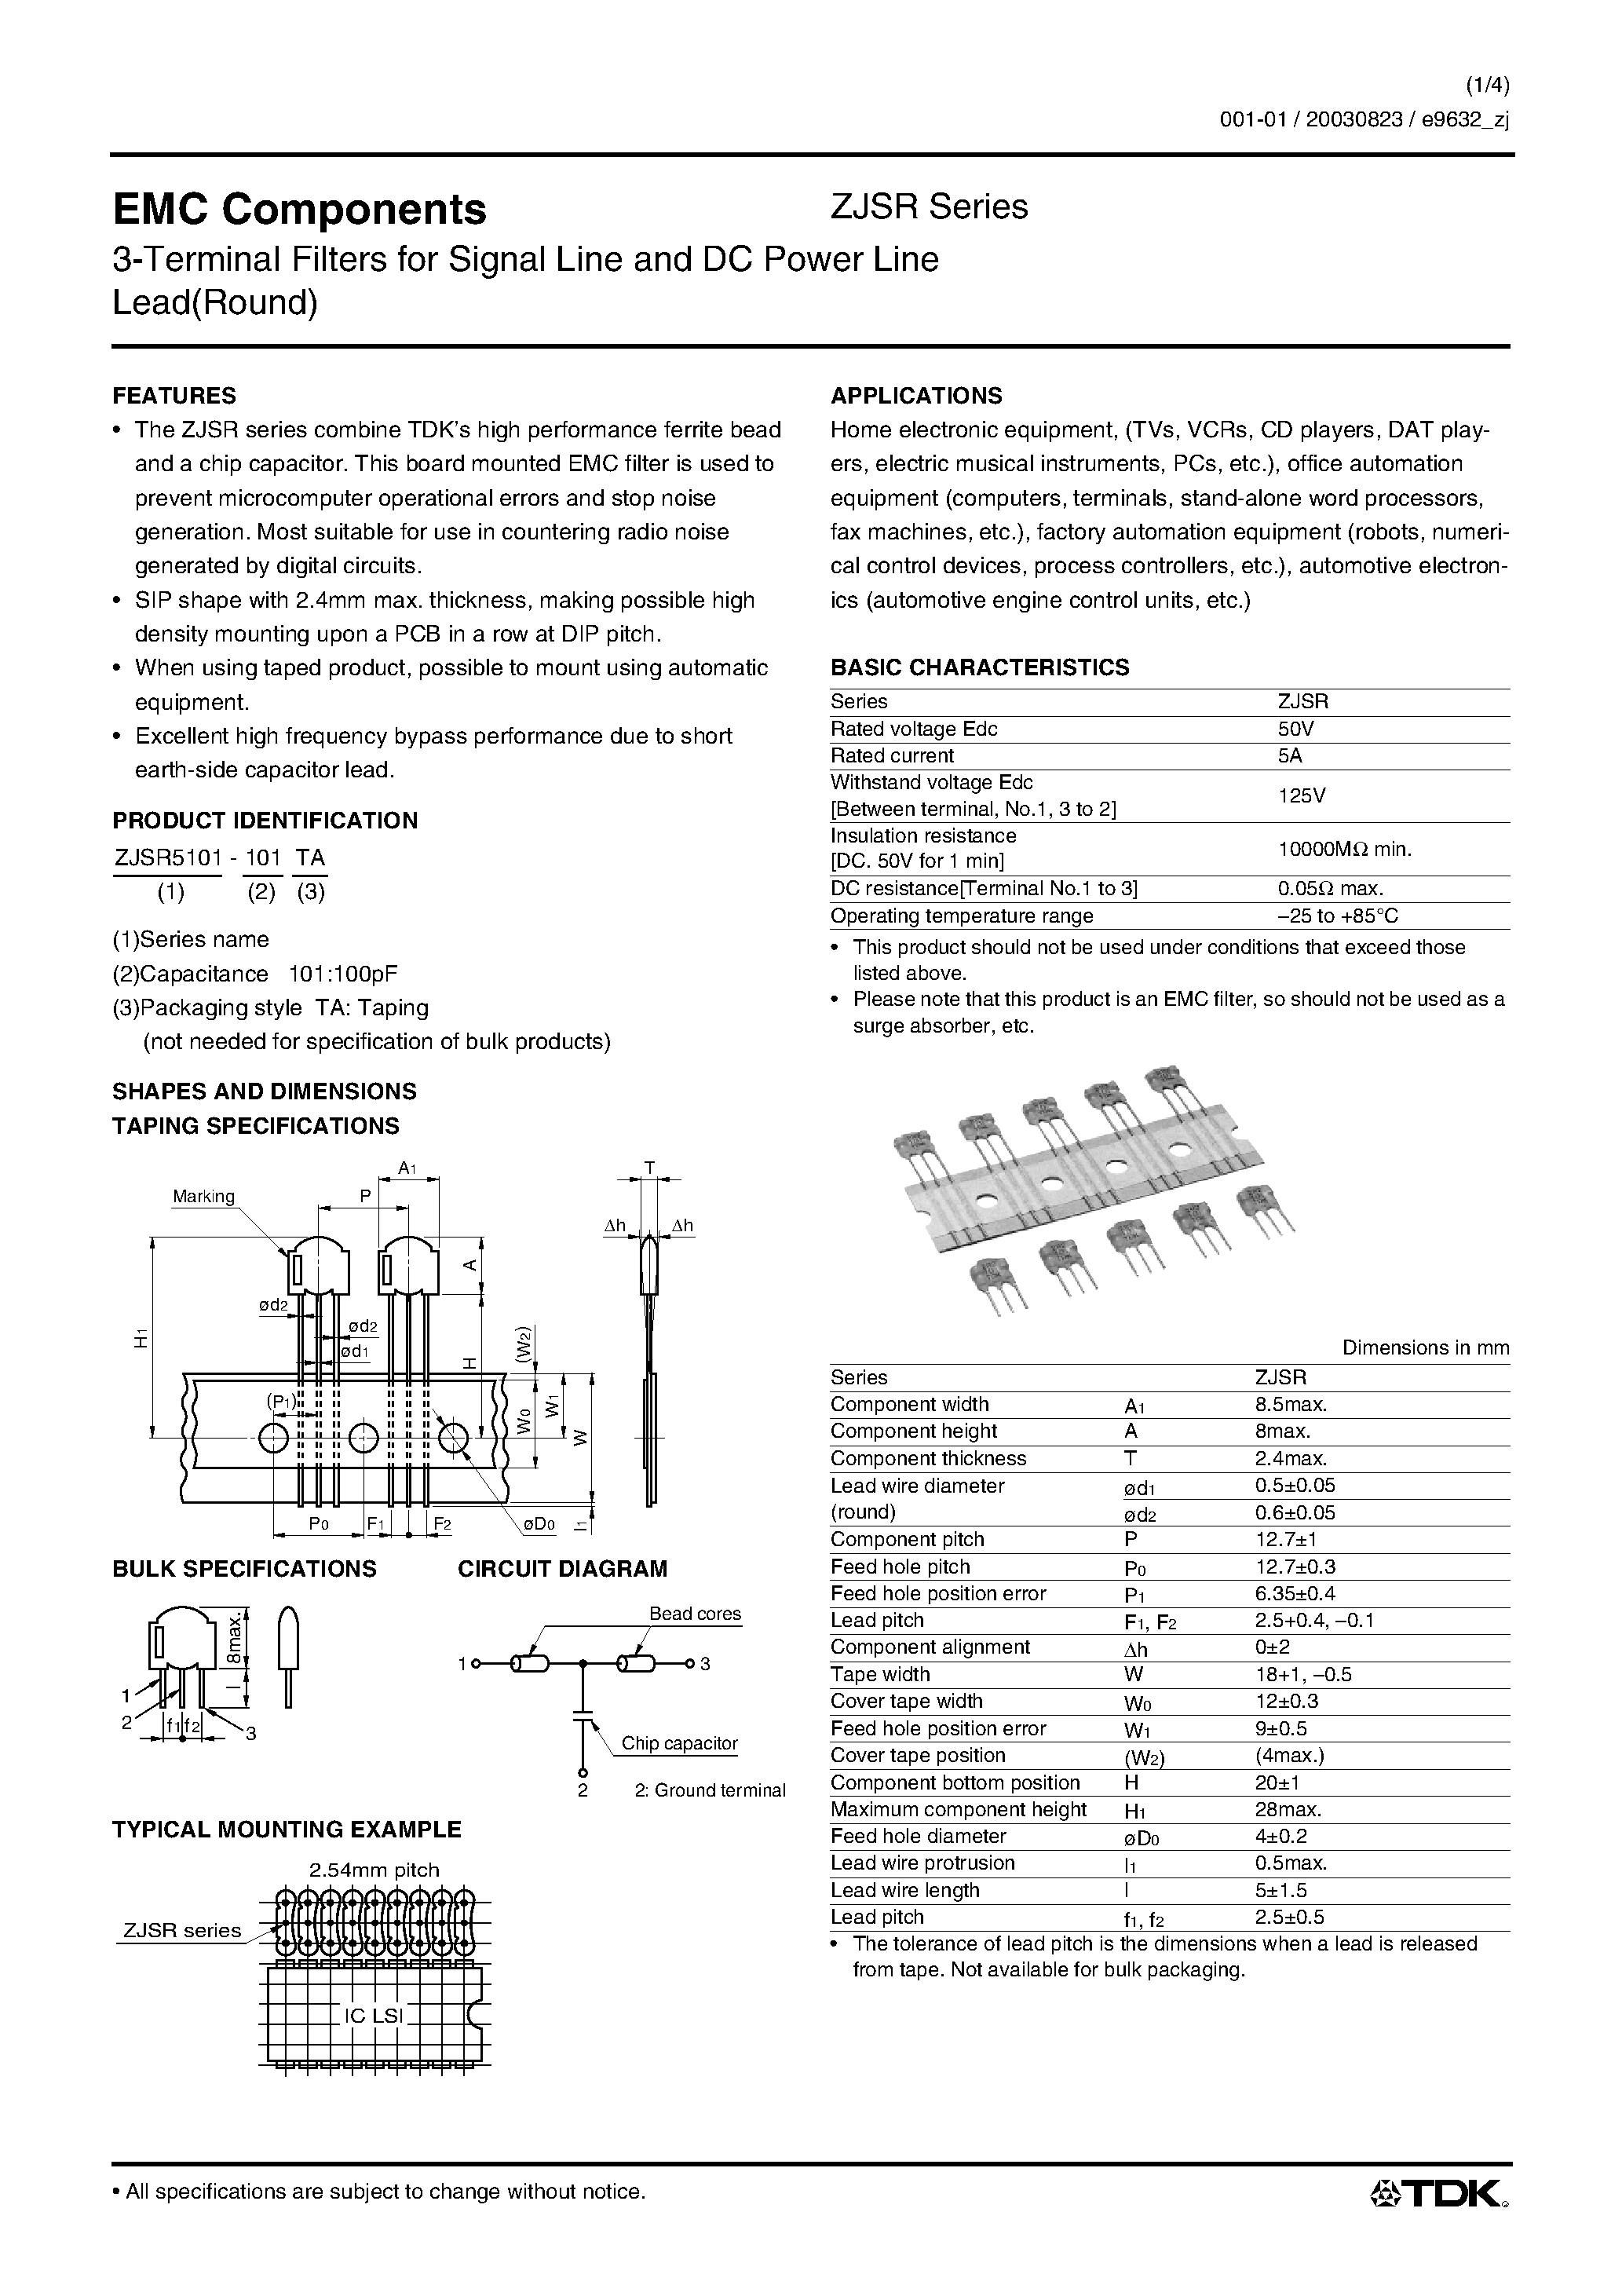 Datasheet ZJSR5101-xxx - EMC Components / 3-Terminal Filters for Signal Line and DC Power Line page 1